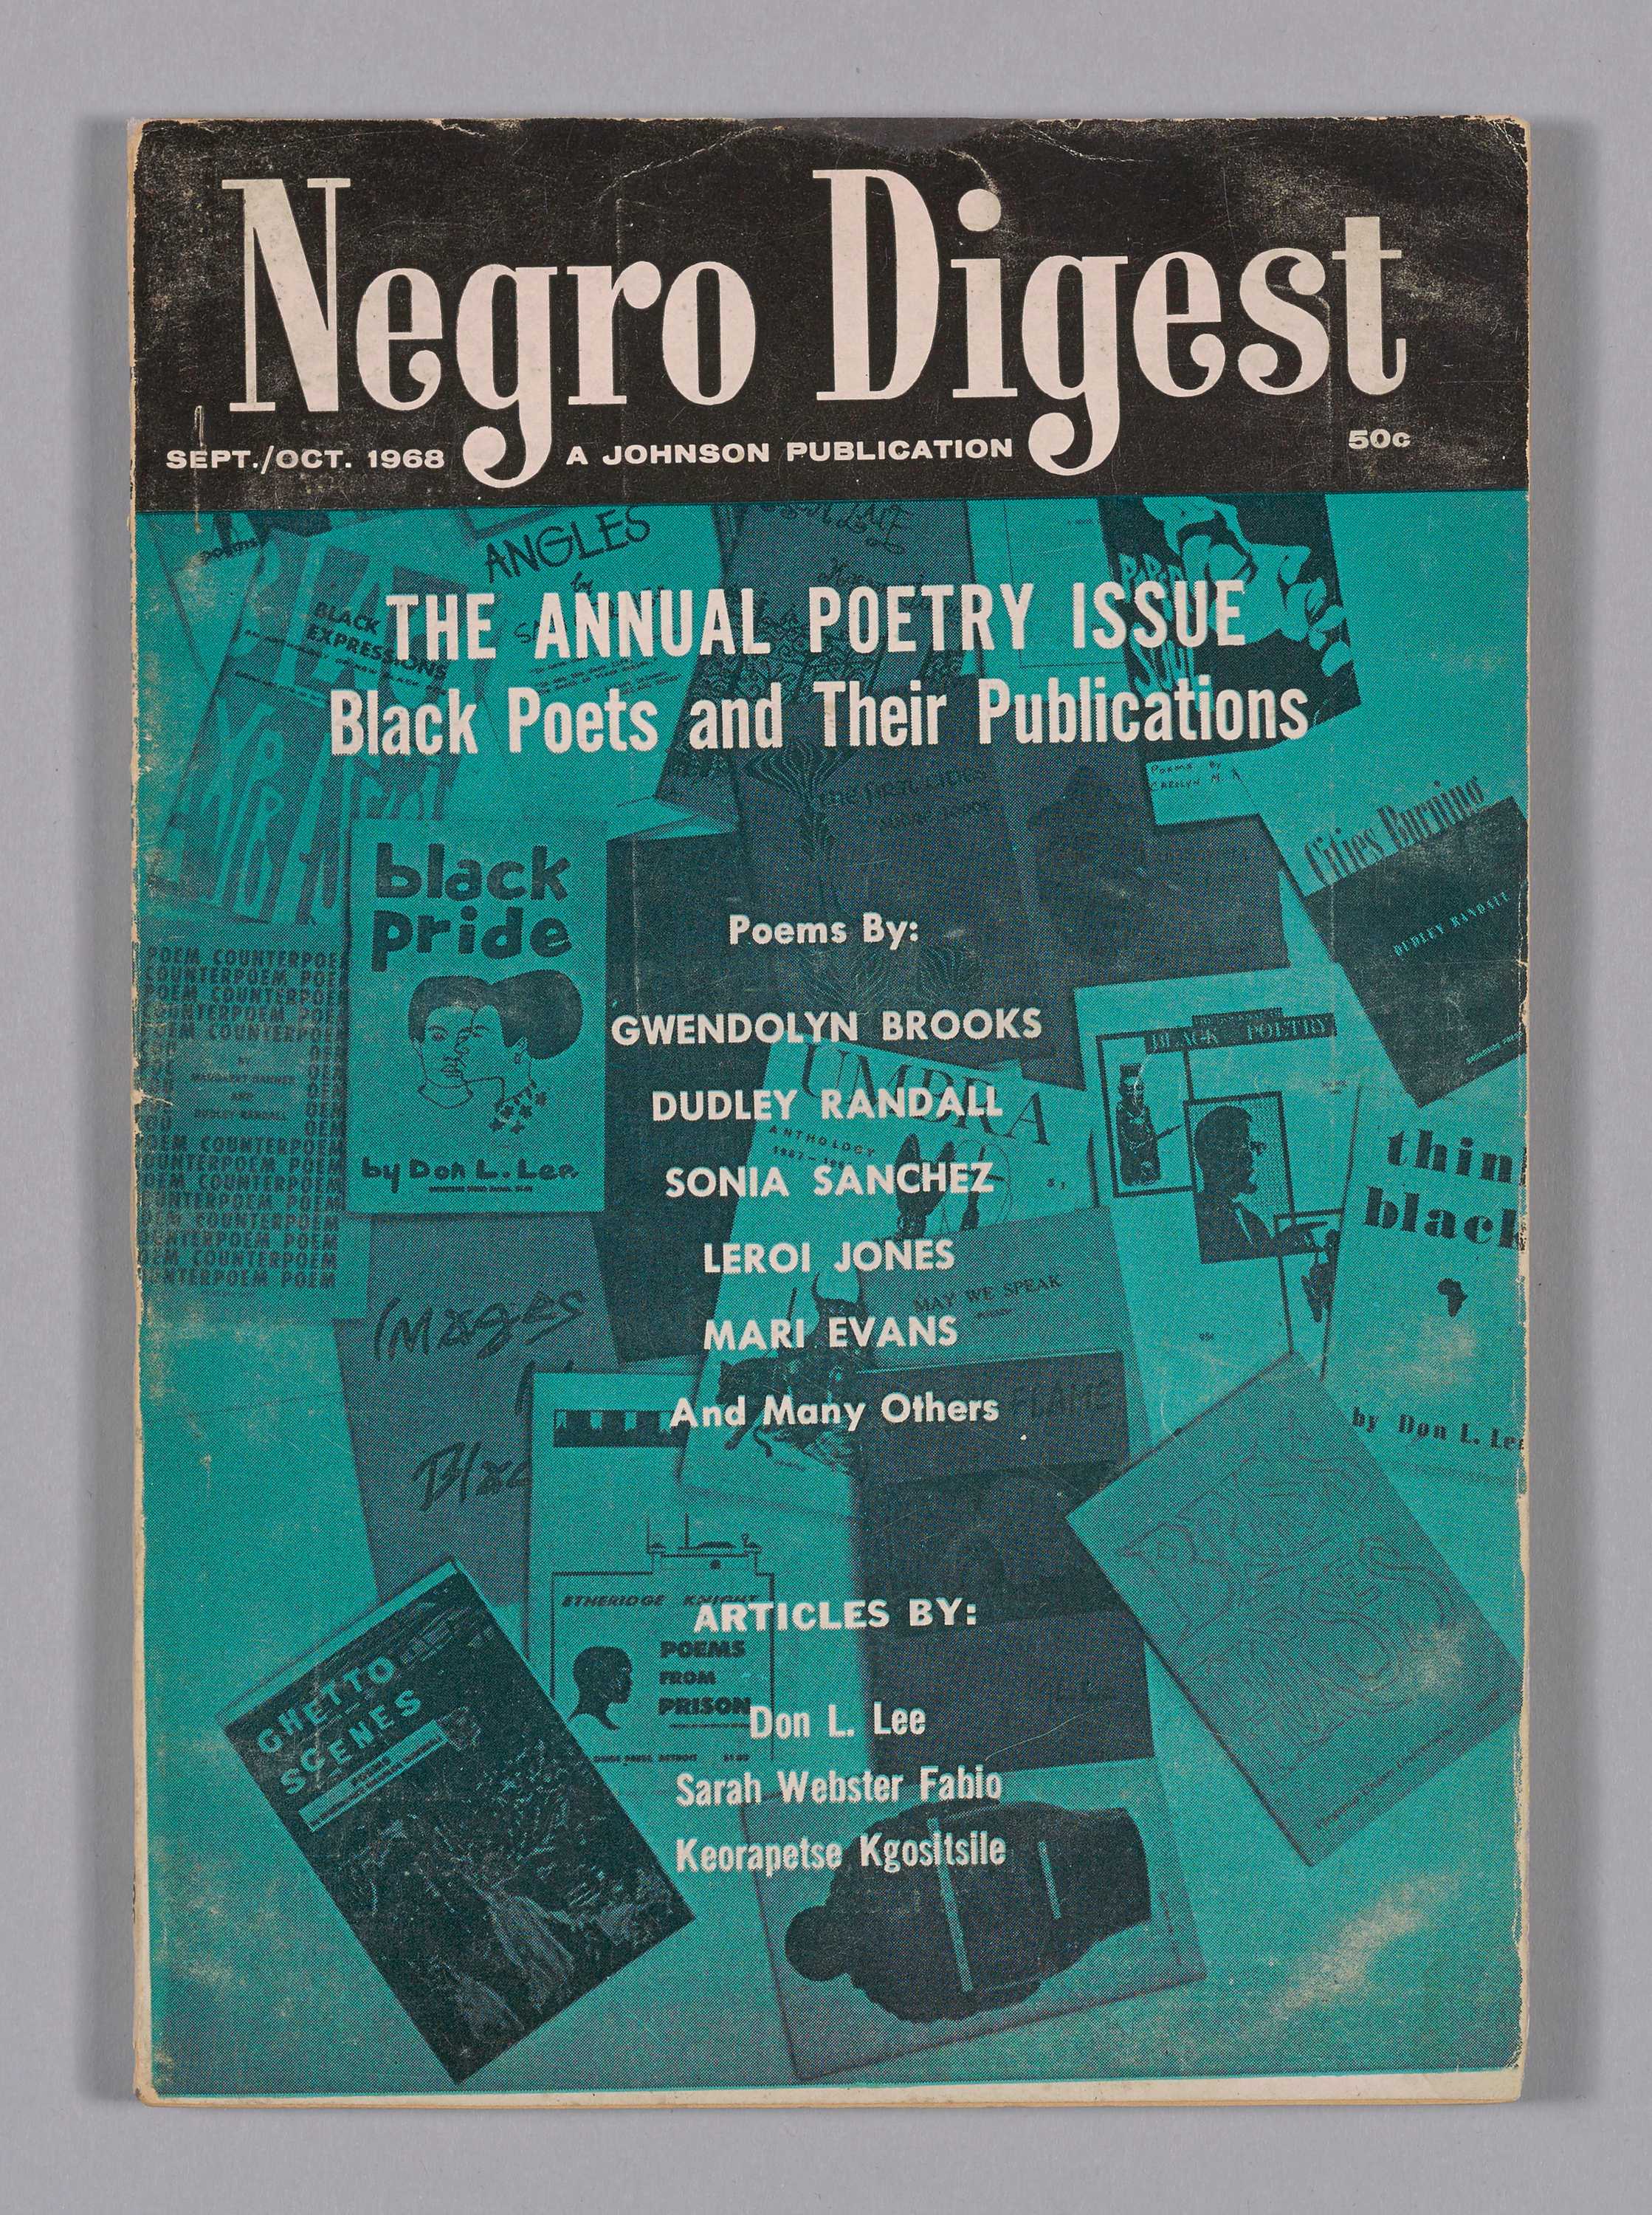 An issue of Negro Digest magazine.